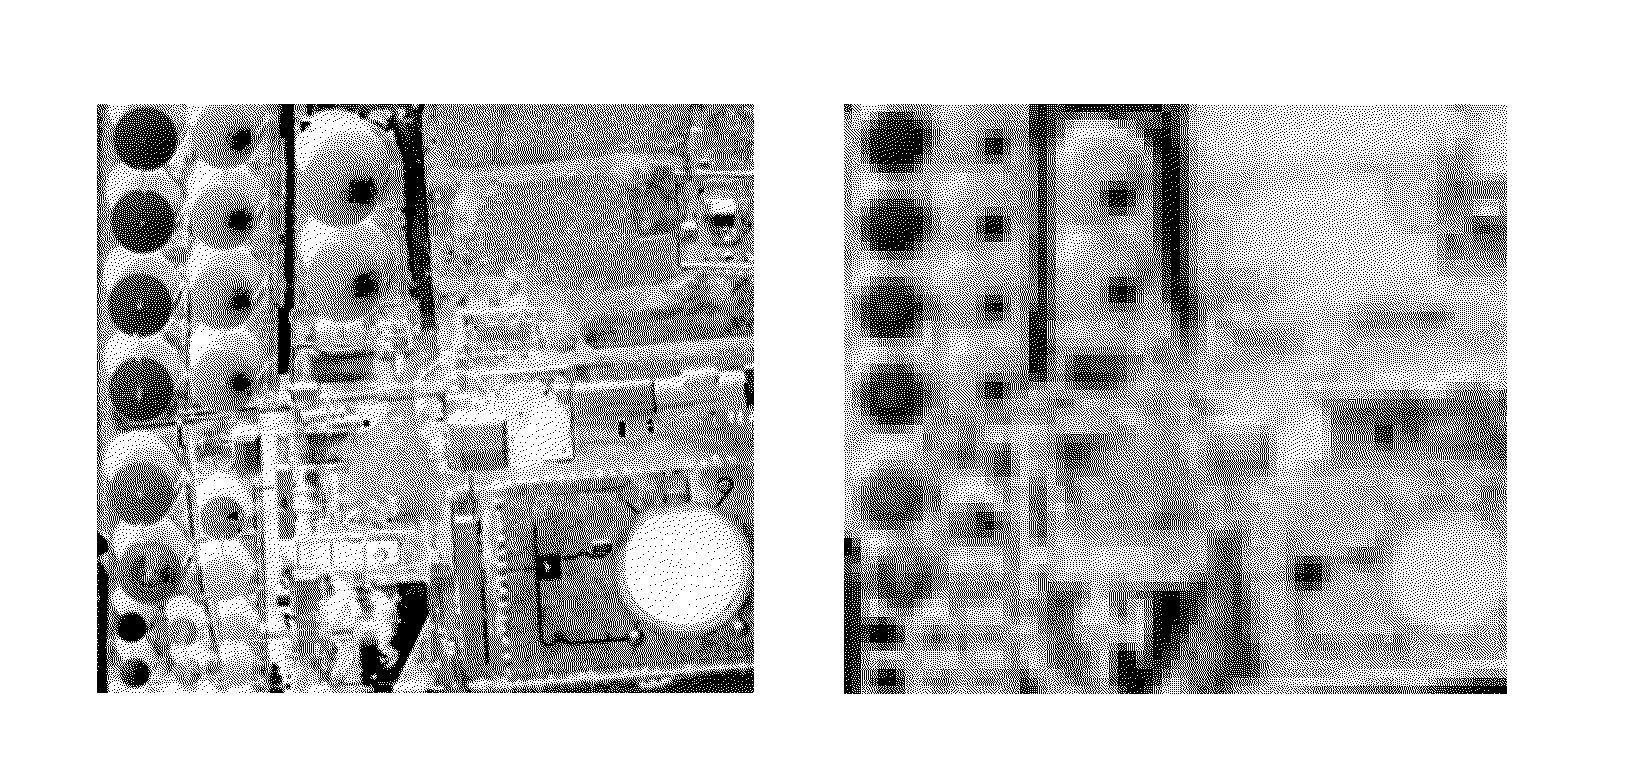 Panchromatic Sharpening Method of Spectral Image Based on Fusion of Overall Structural Information and Spatial Detail Information